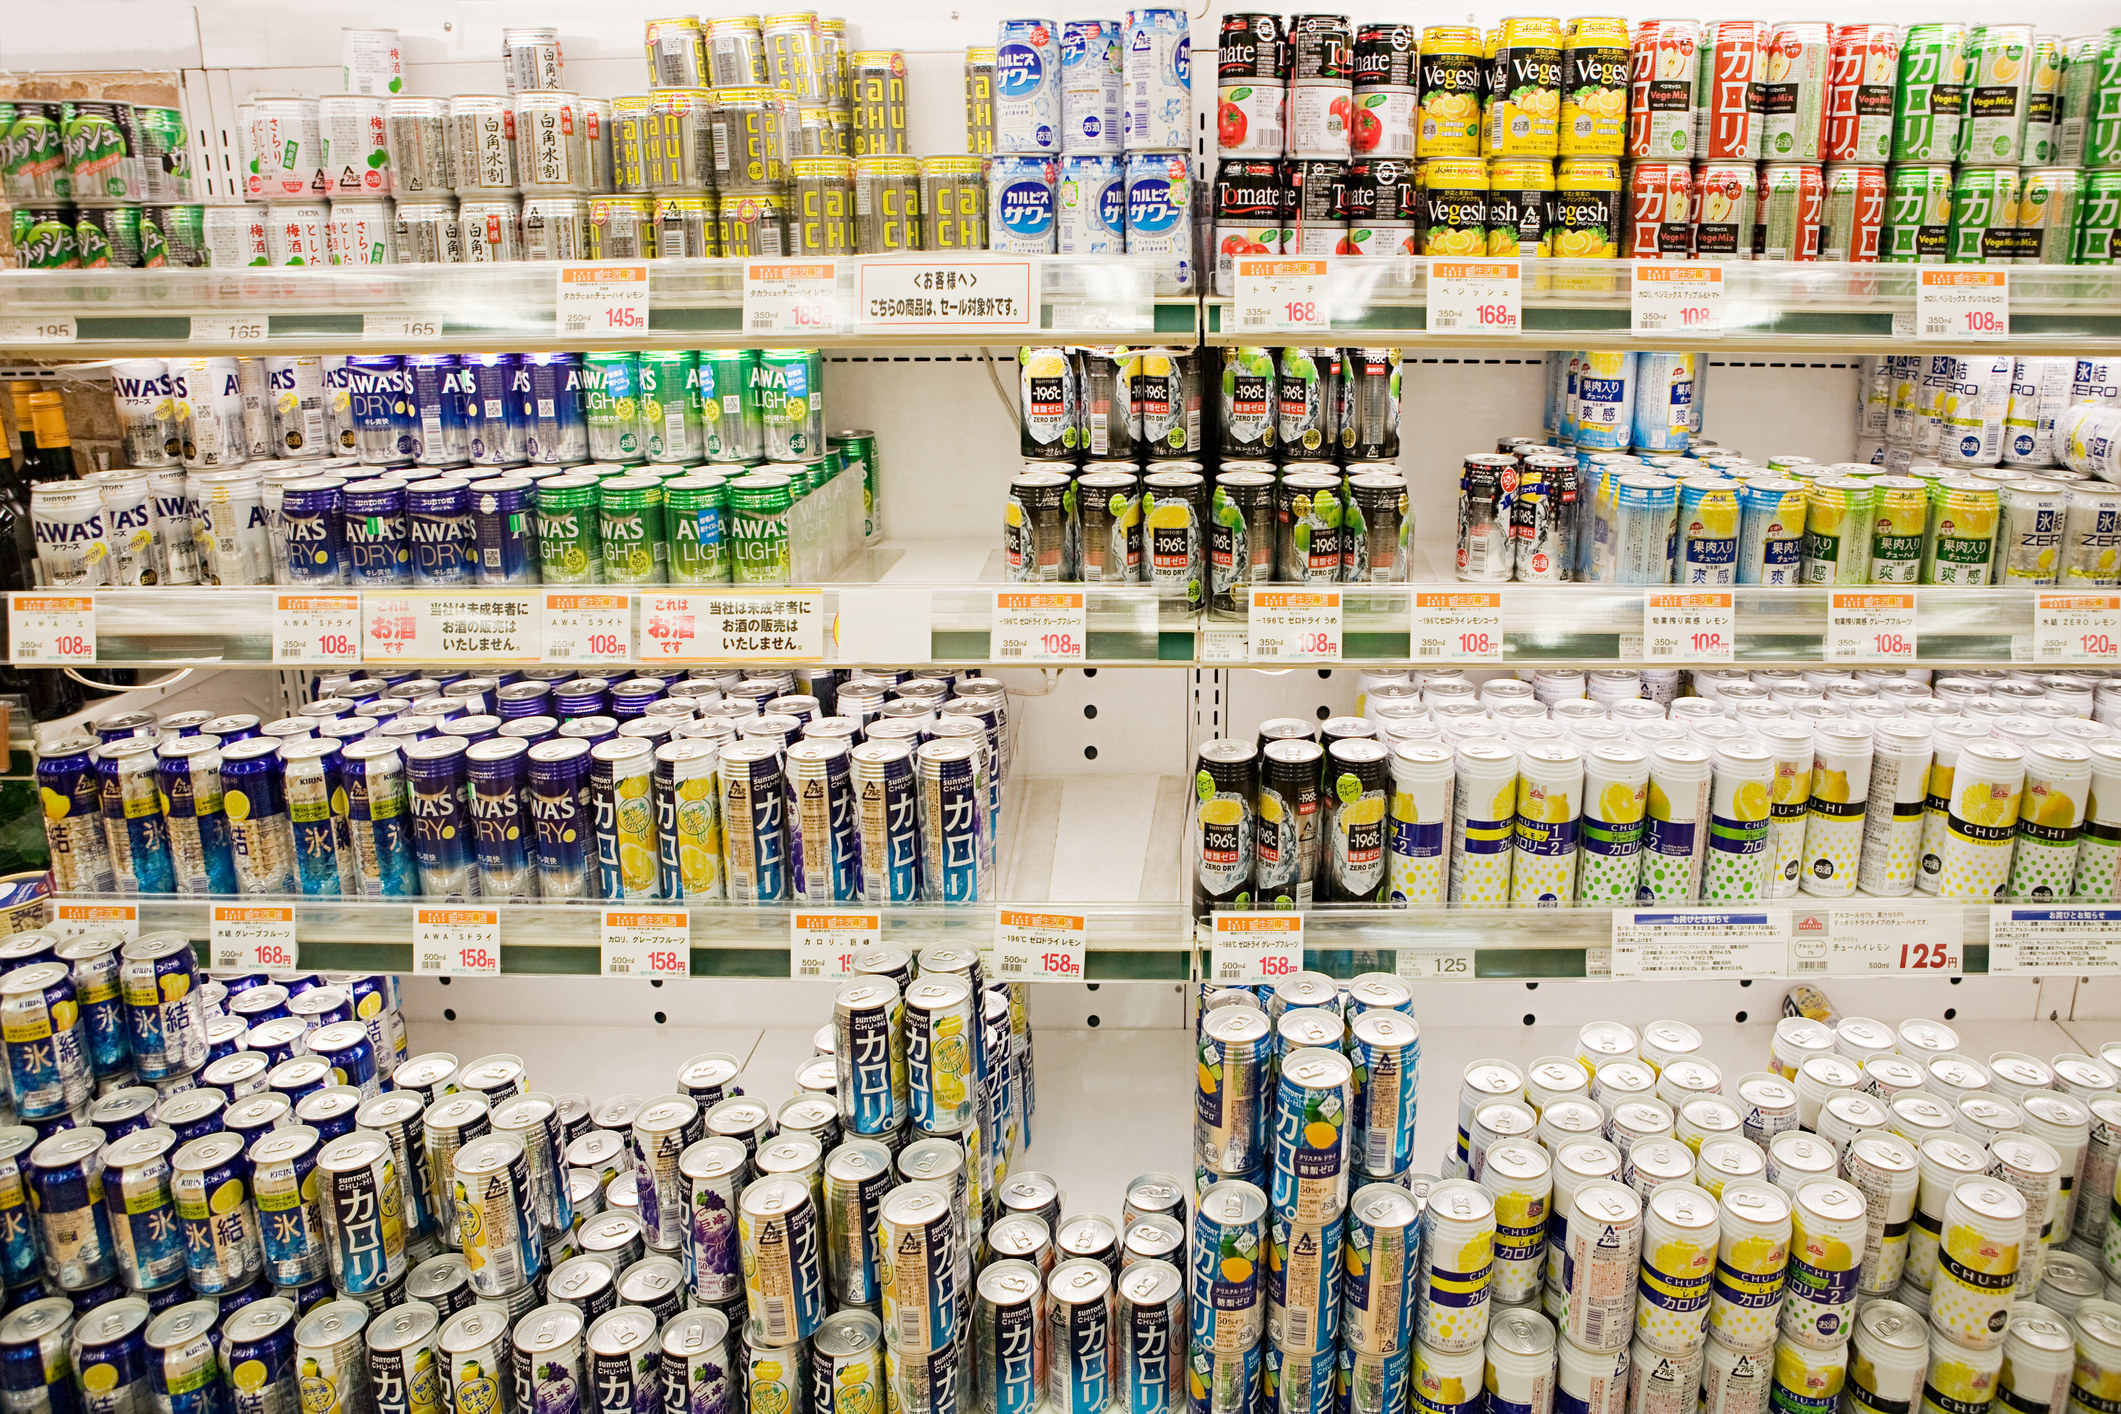 A refrigerated display of canned Asian beverages